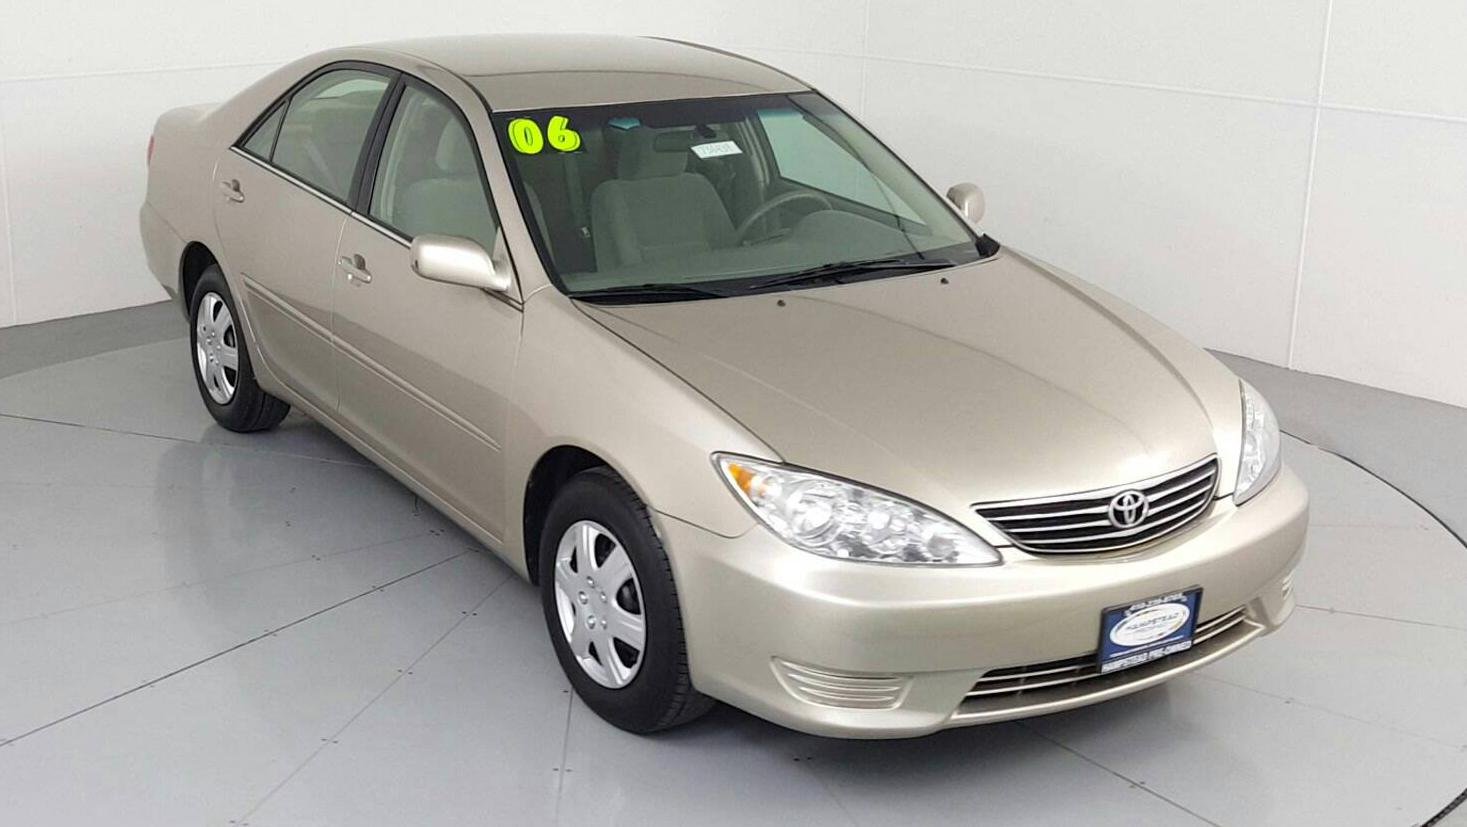 Pre-Owned 2006 TOYOTA Camry LE 4-door Mid-Size Passenger Car in